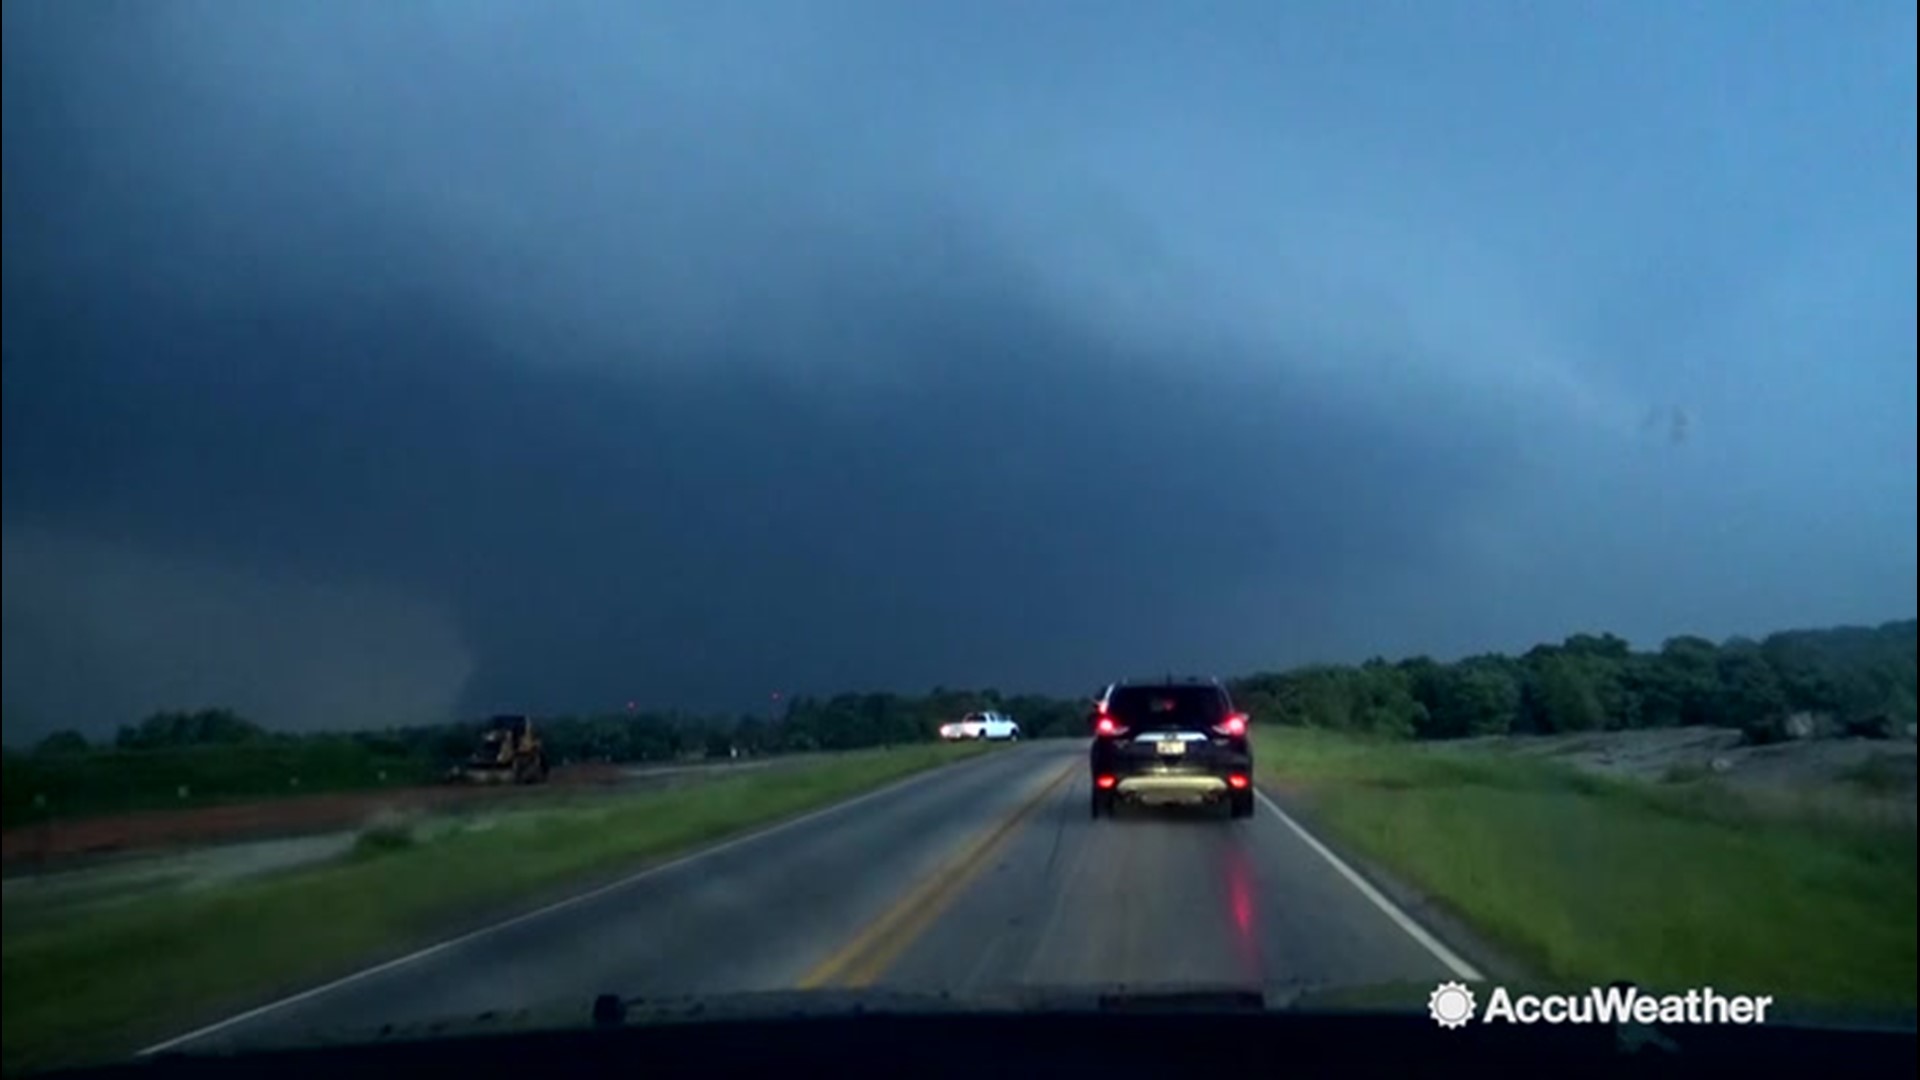 Several violent tornadoes were spotted tearing through parts of Oklahoma and Missouri by AccuWeather's Blake Naftel on May 22.